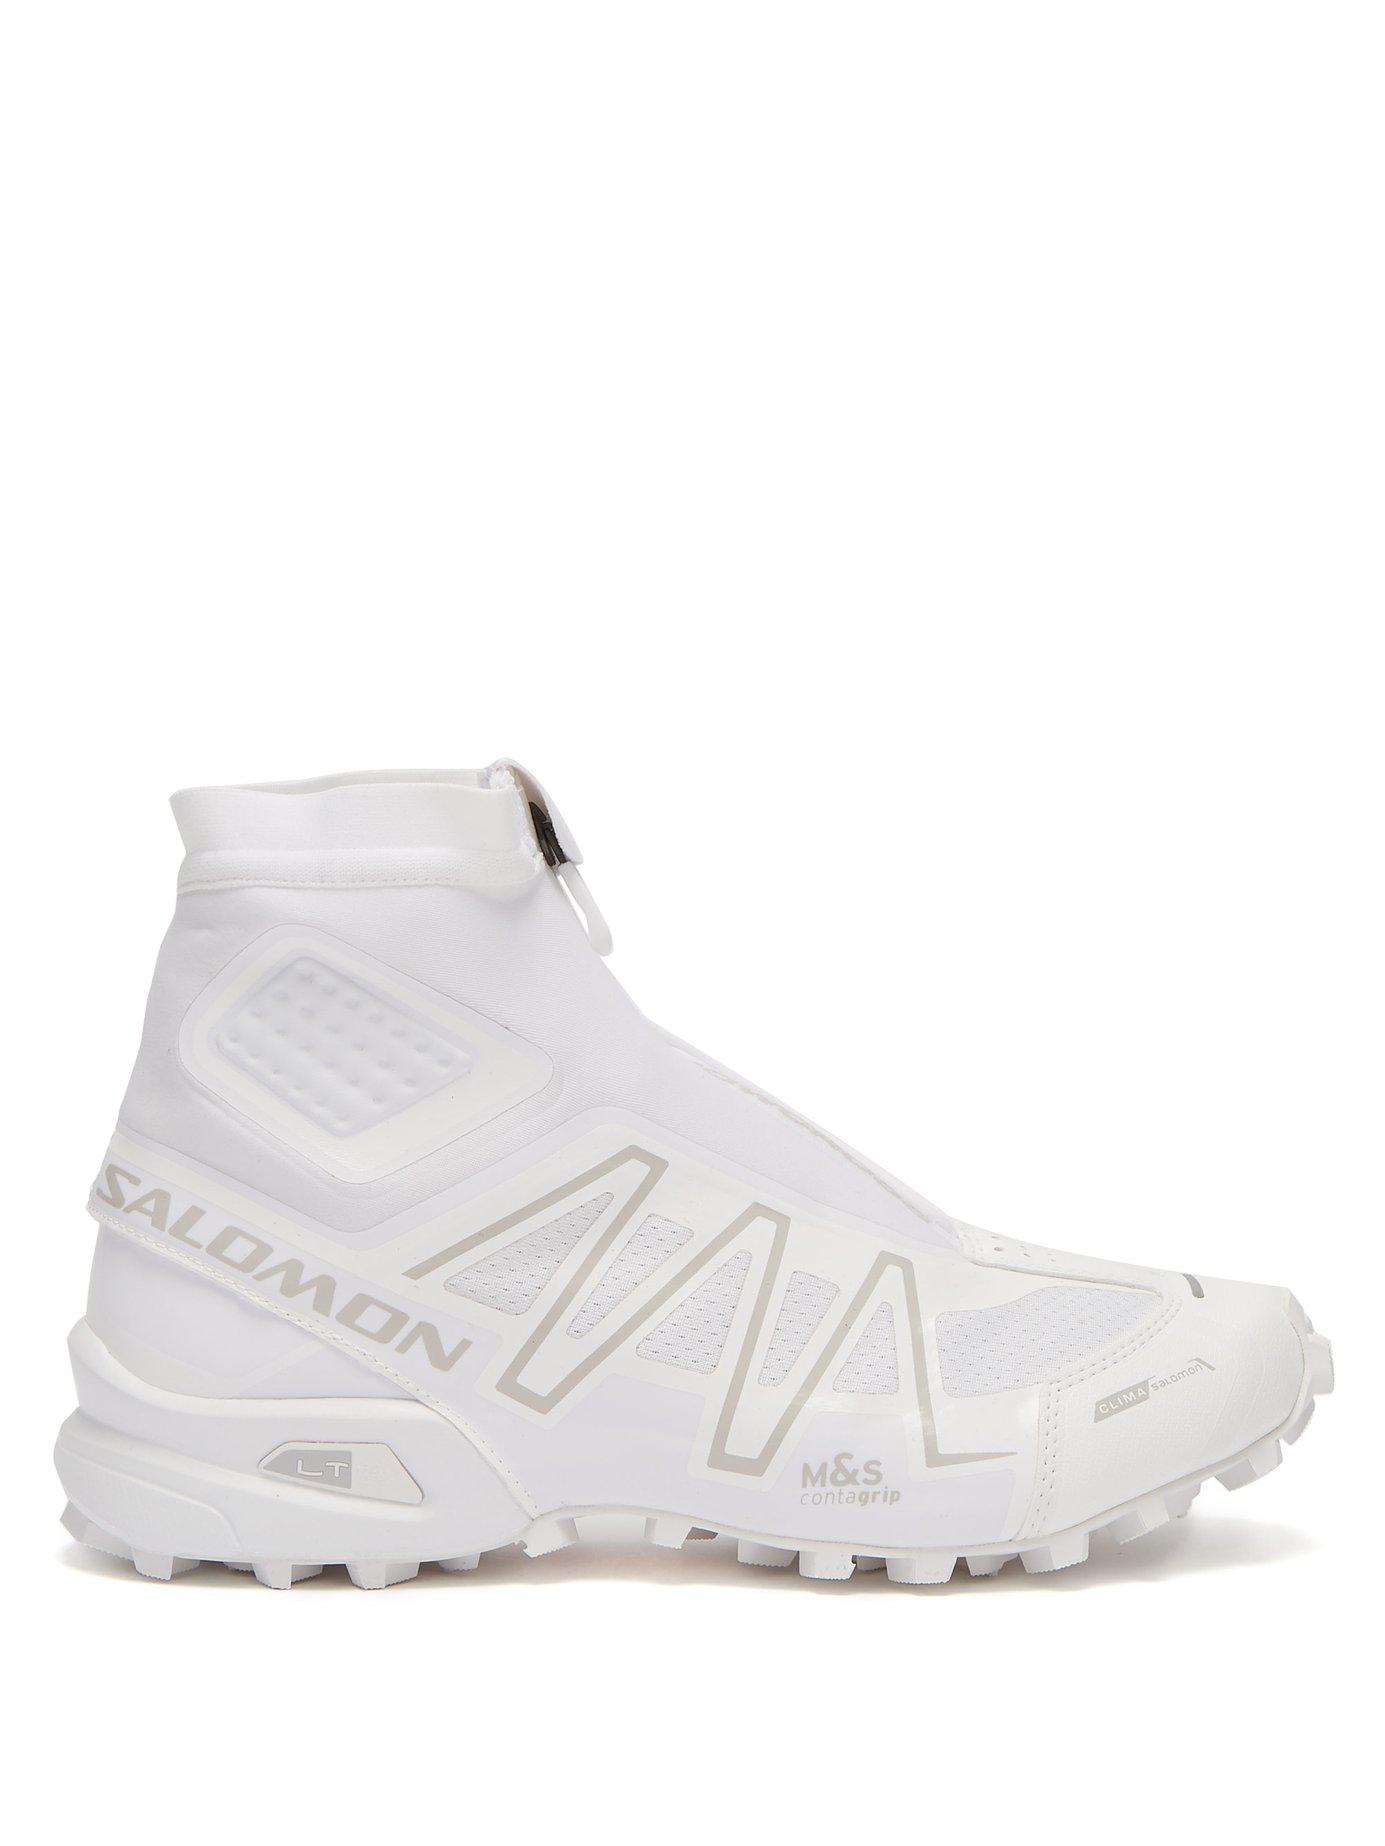 Yves Salomon Synthetic S/lab Snowcross Adv Trainers in White for Men - Lyst